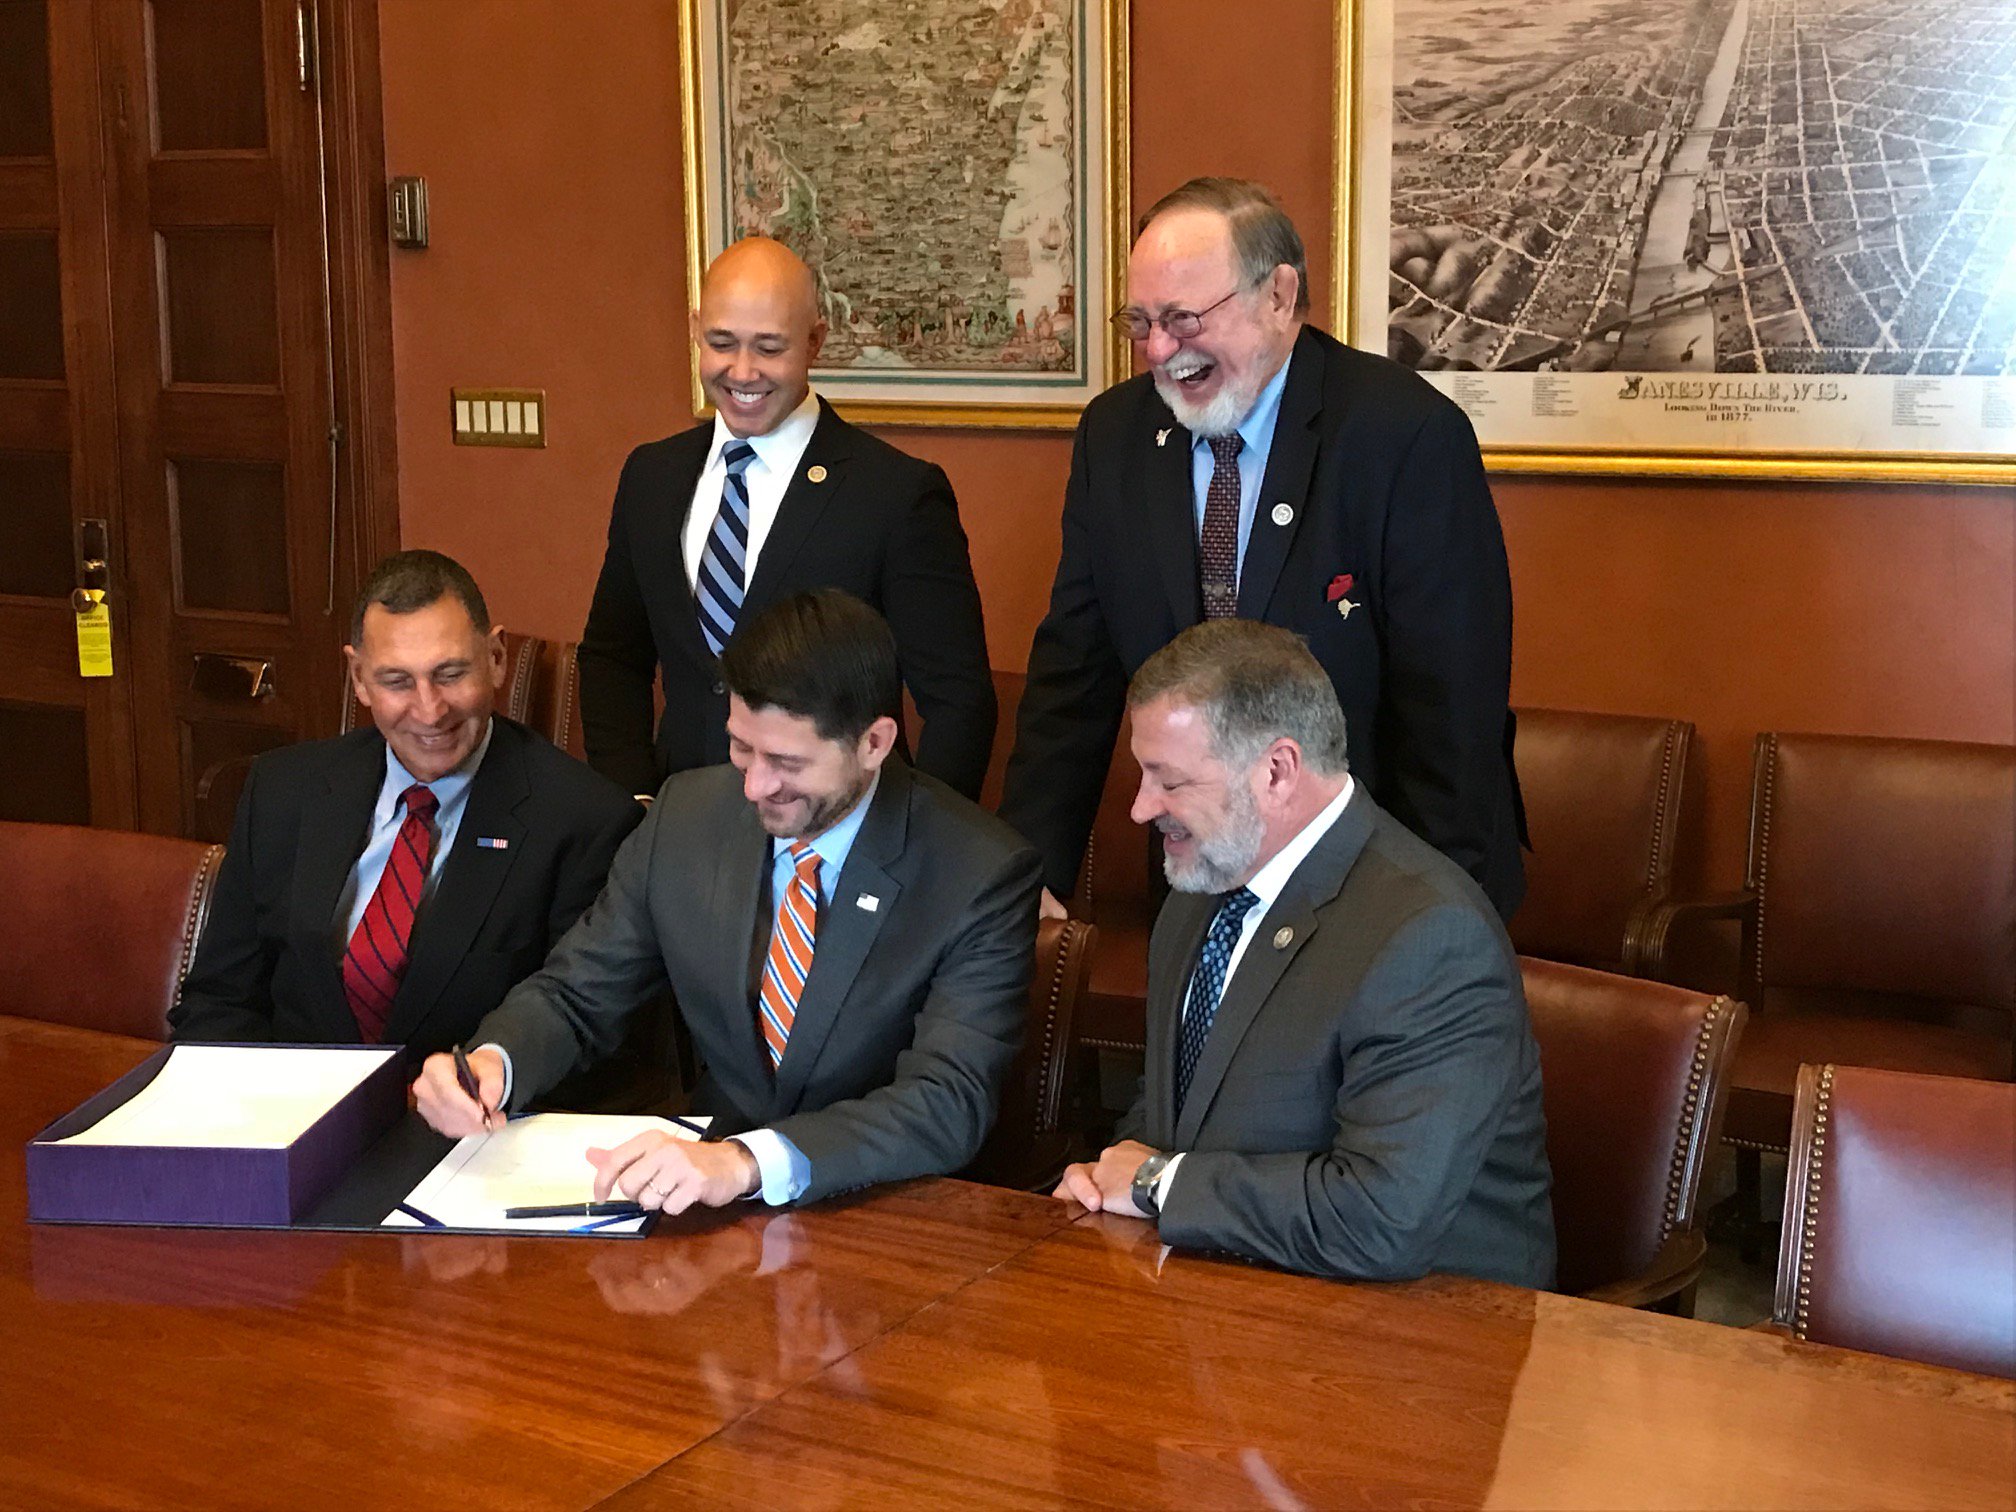 Reps. Brian Mast (FL-18), Don Young (AK-At Large), Frank LoBiondo (NJ-2), Paul Ryan (WI-1) and Bill Shuster (PA-9) meet for the signing of the Frank LoBiondo Coast Guard Authorization Act of 2018, which includes the Jupiter Island Land Transfer Act, on November 30, 2018 in the United States Capitol Building.